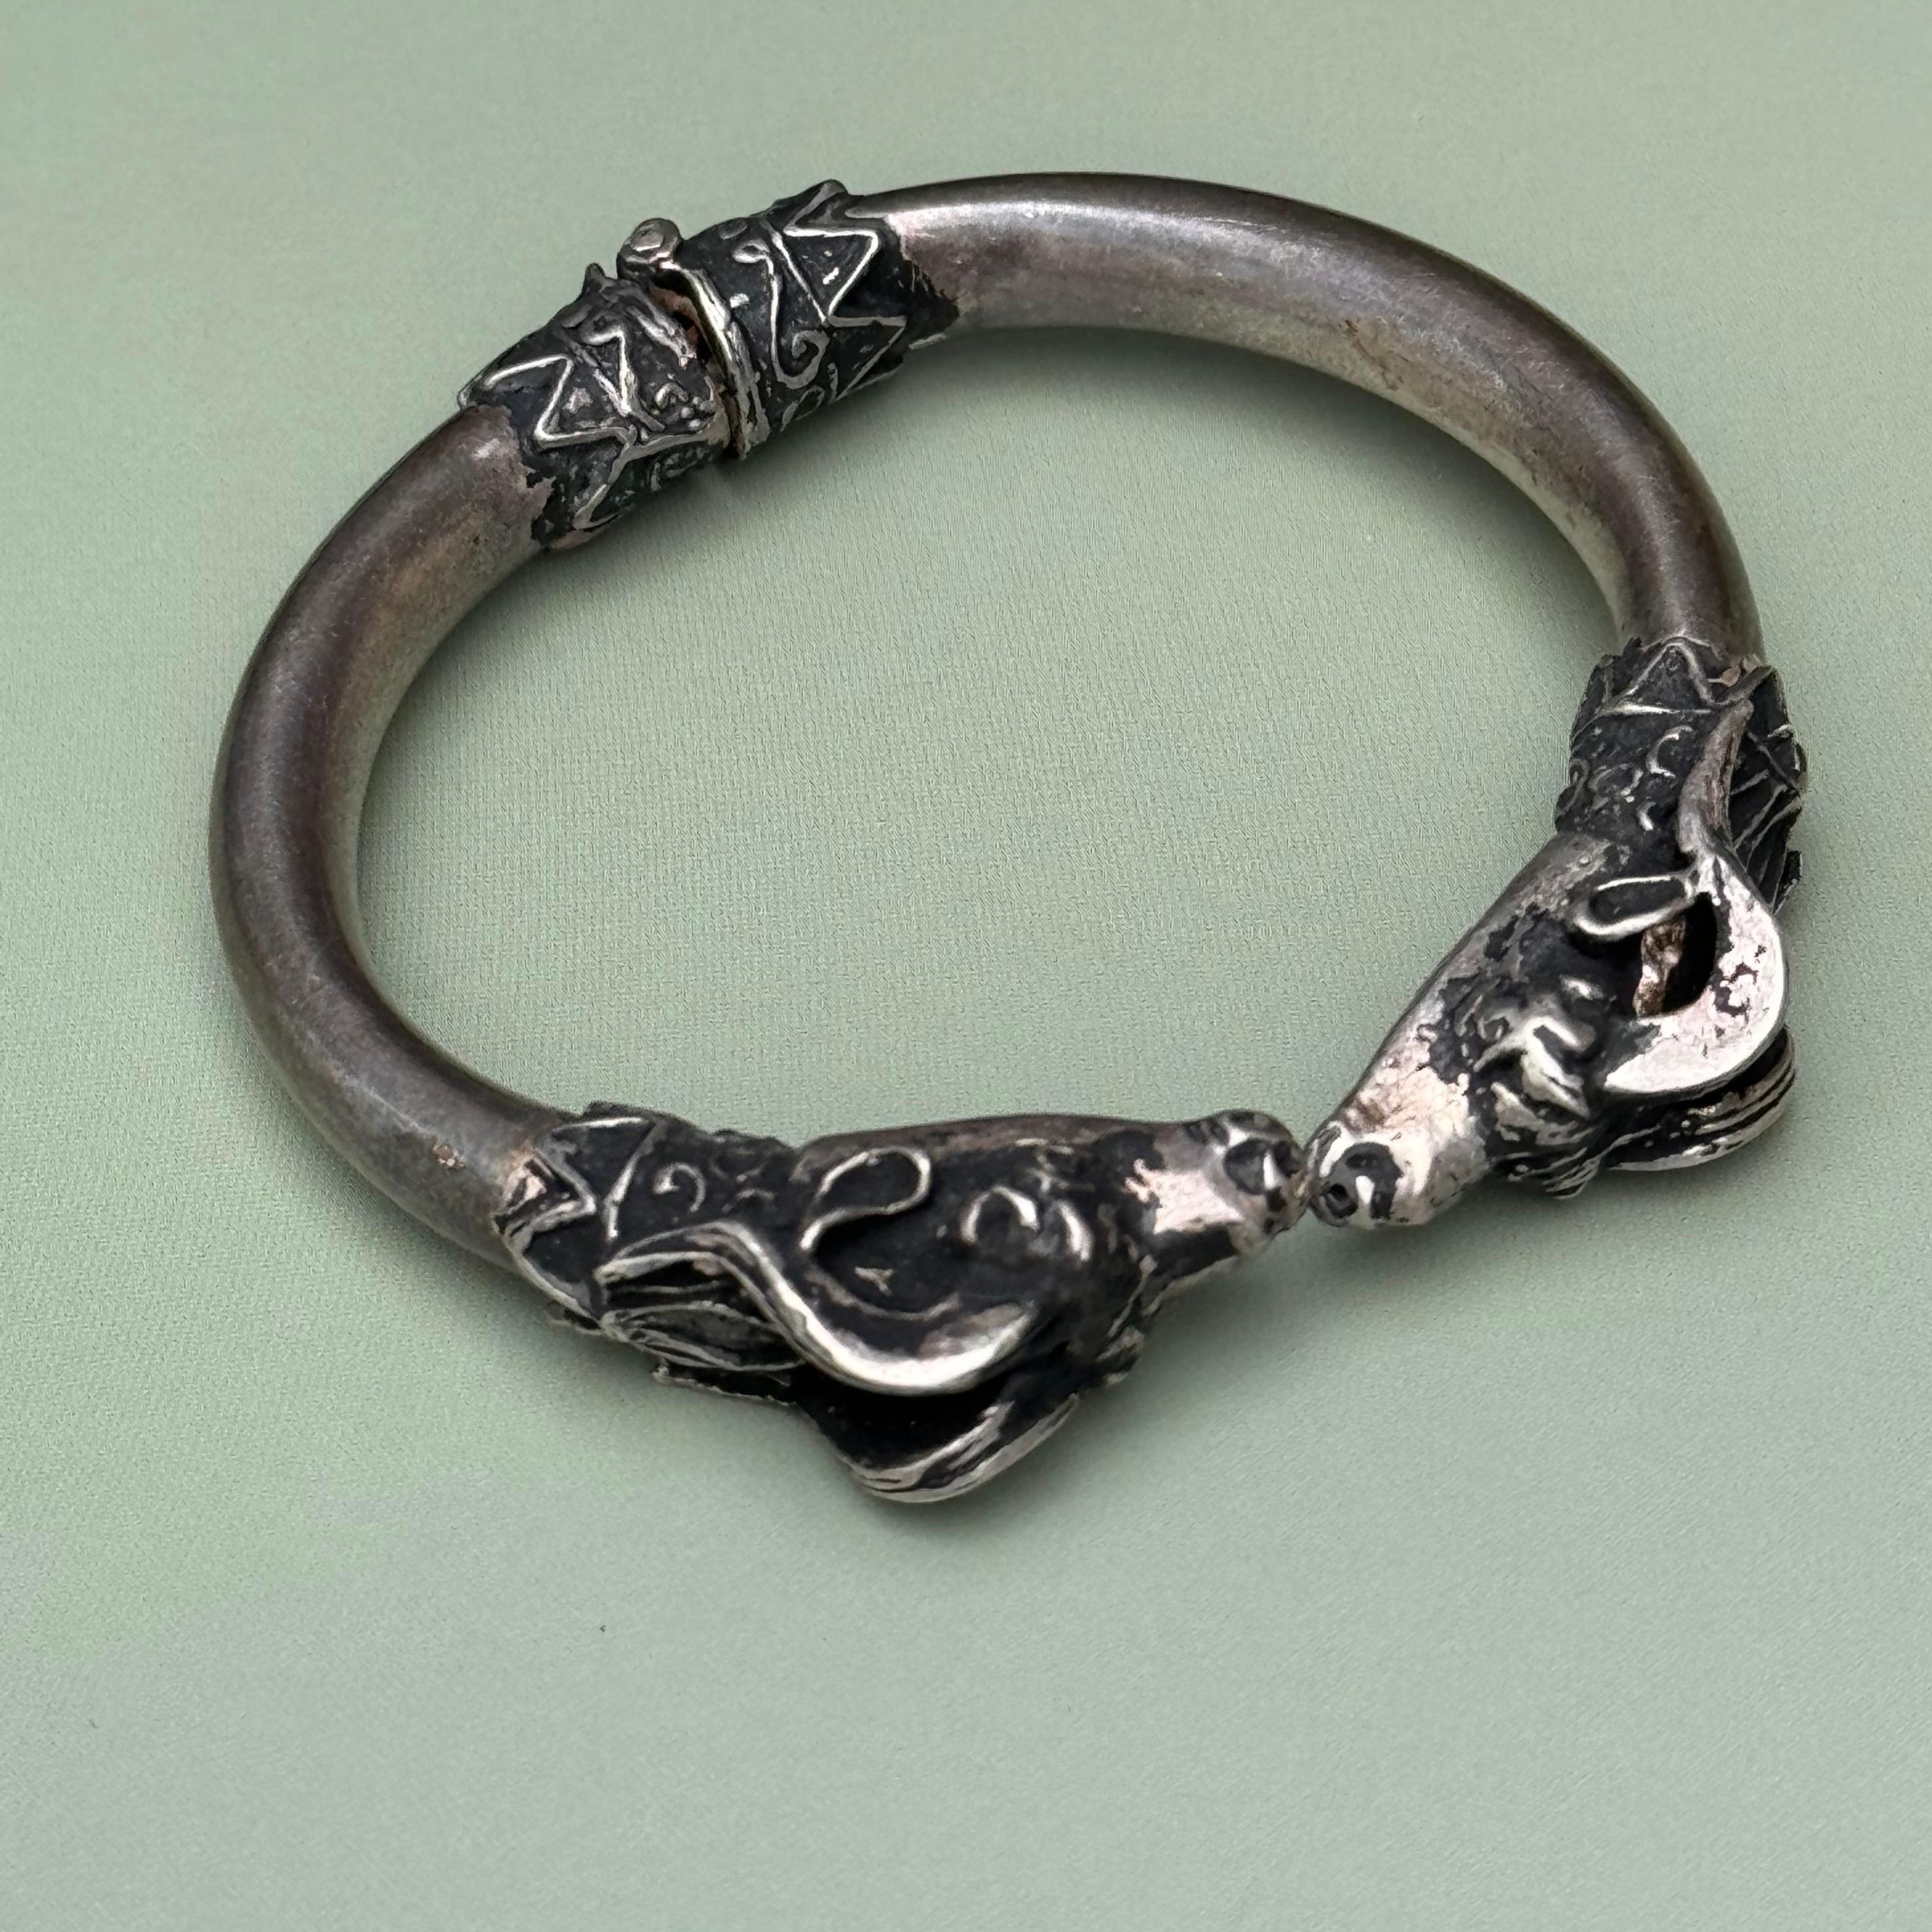 Bracelet features intricately detailed rams' heads, symbolizing strength and power, facing each other as if in a kiss. The hinged design allows for easy wearing and removal. The vintage aesthetic adds a touch of timeless elegance to any